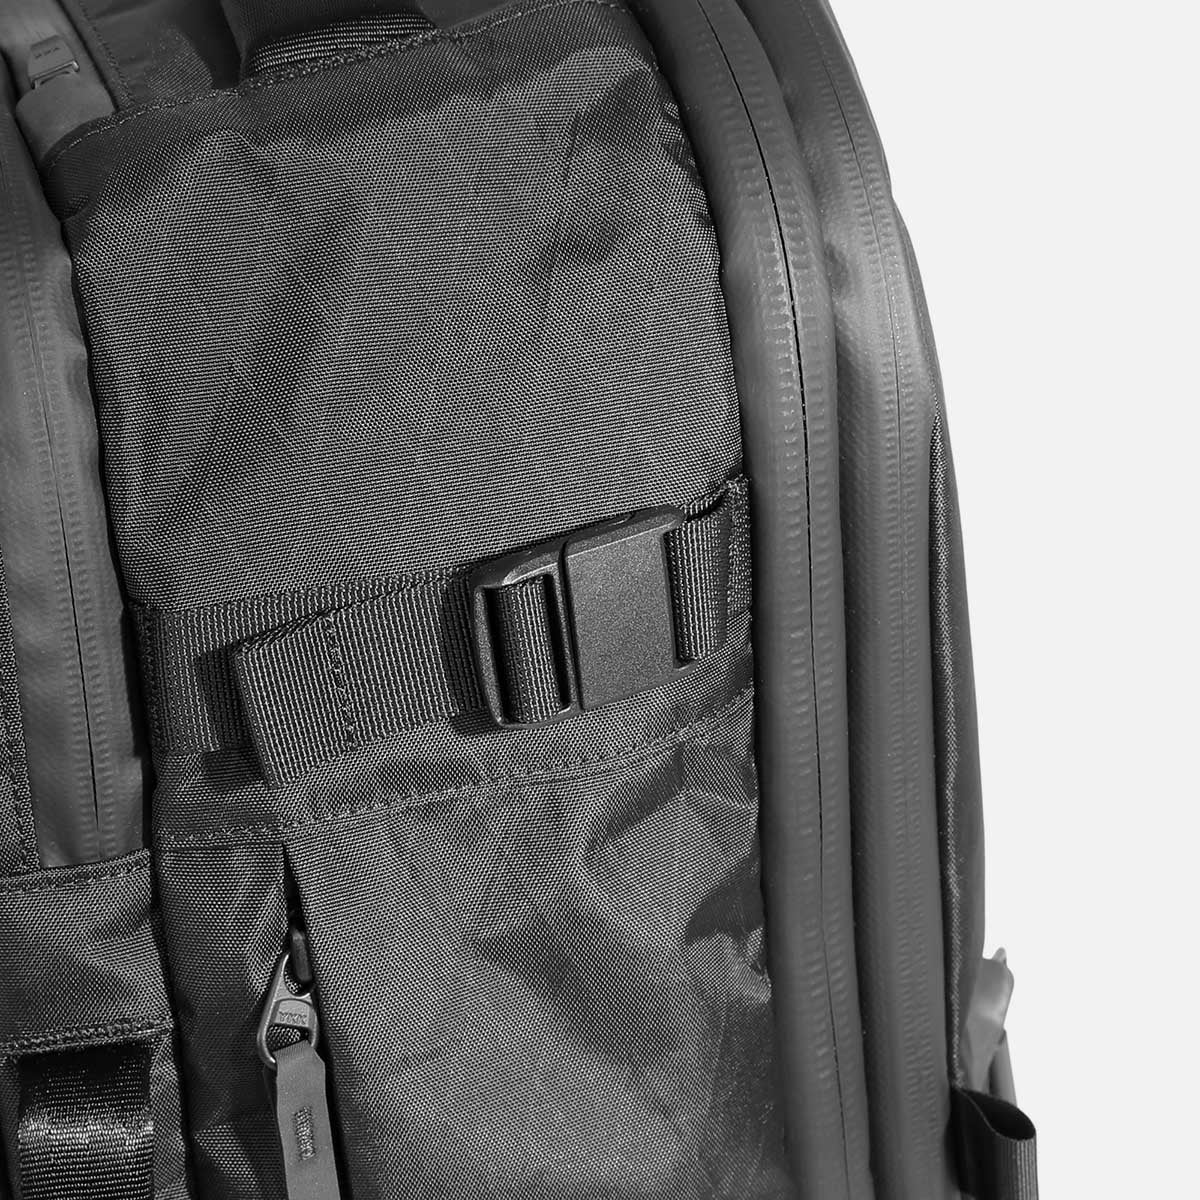 Travel Pack 3 Small